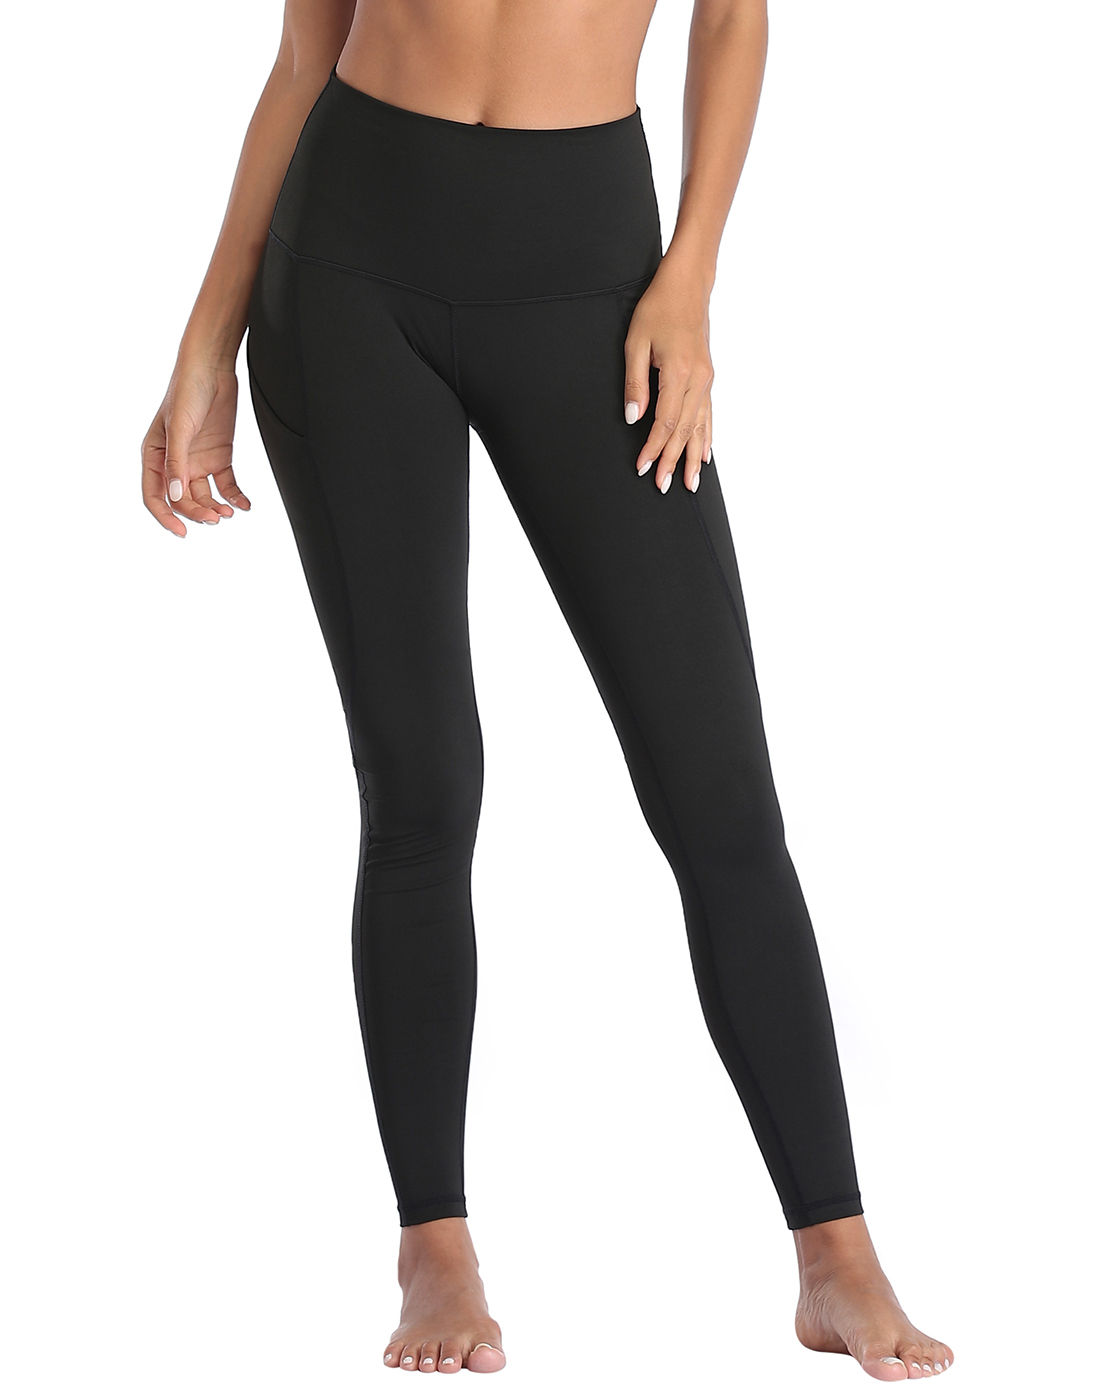 HDE Yoga Pants with Pockets for Women High Waisted Tummy Control Leggings (Black, L) - image 2 of 6